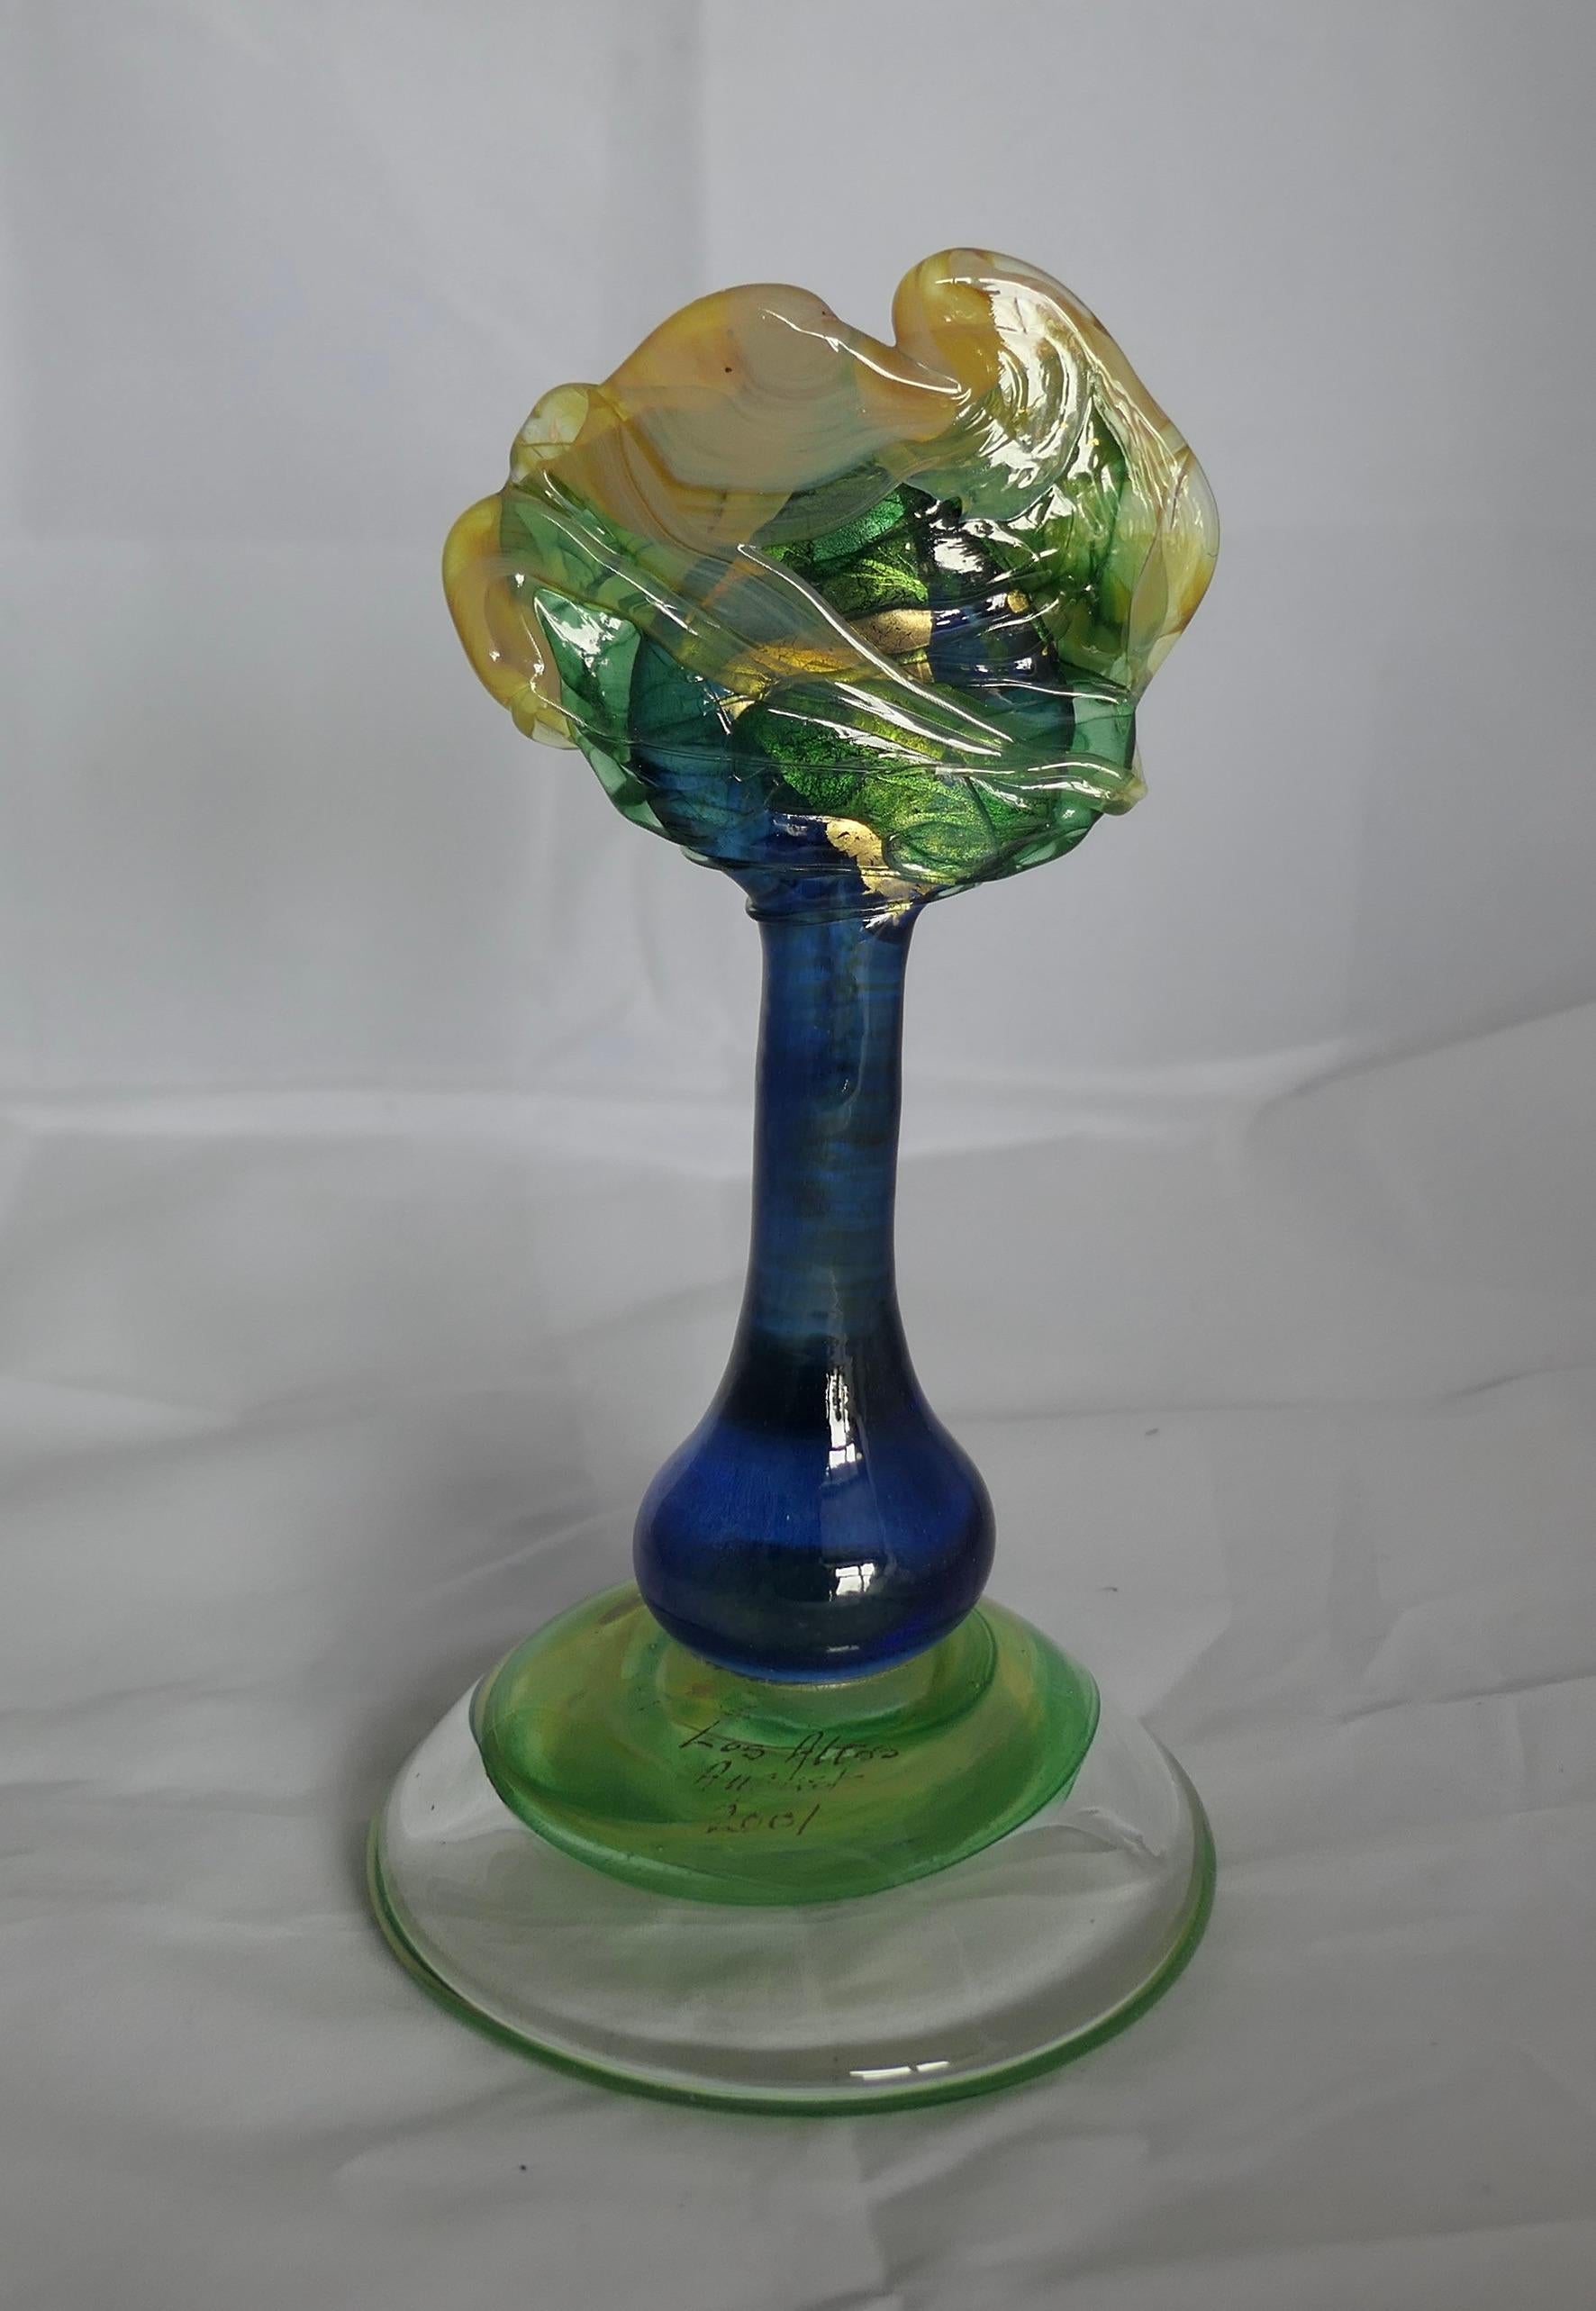 Isle of Wight Studio Glass Tree Signed Martin Evans

Superb piece in the Arts and Crafts Style Signed Martin Evans 2001, the tree is is in neon blue with Green and Gold
On the upper side of the base is the title “Los Altos August 2001”, this is